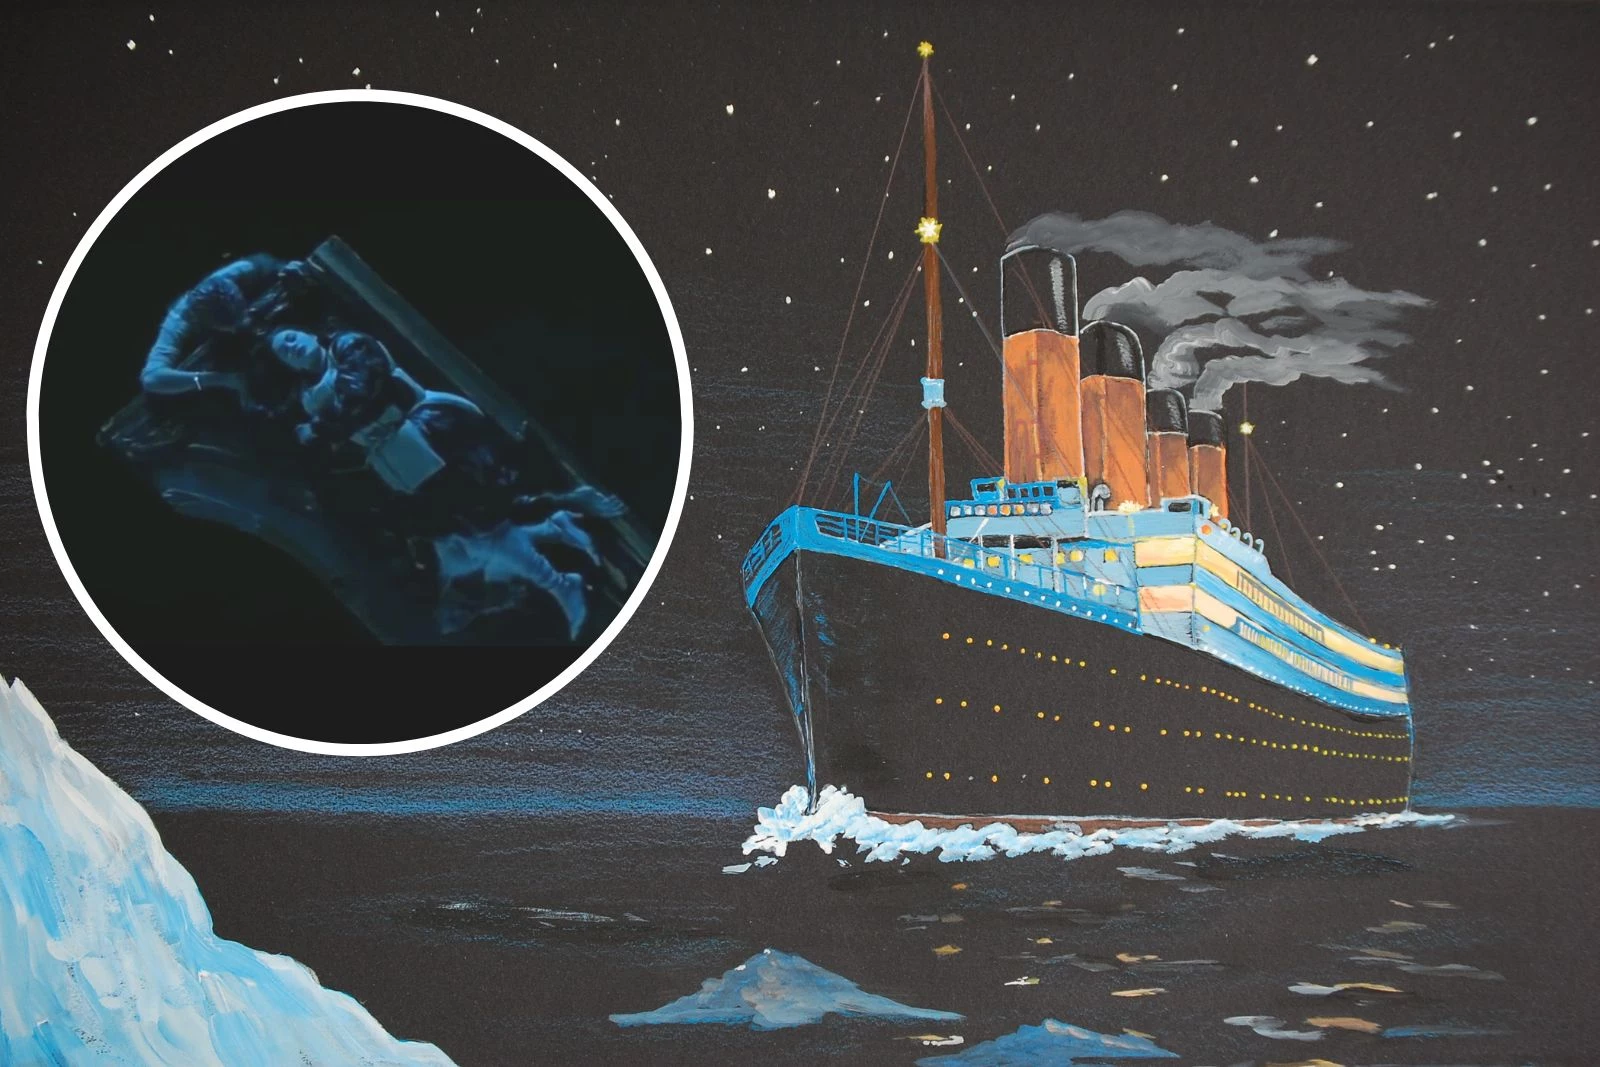 You Can Get a Pool Float Inspired by THAT Door from "Titanic"